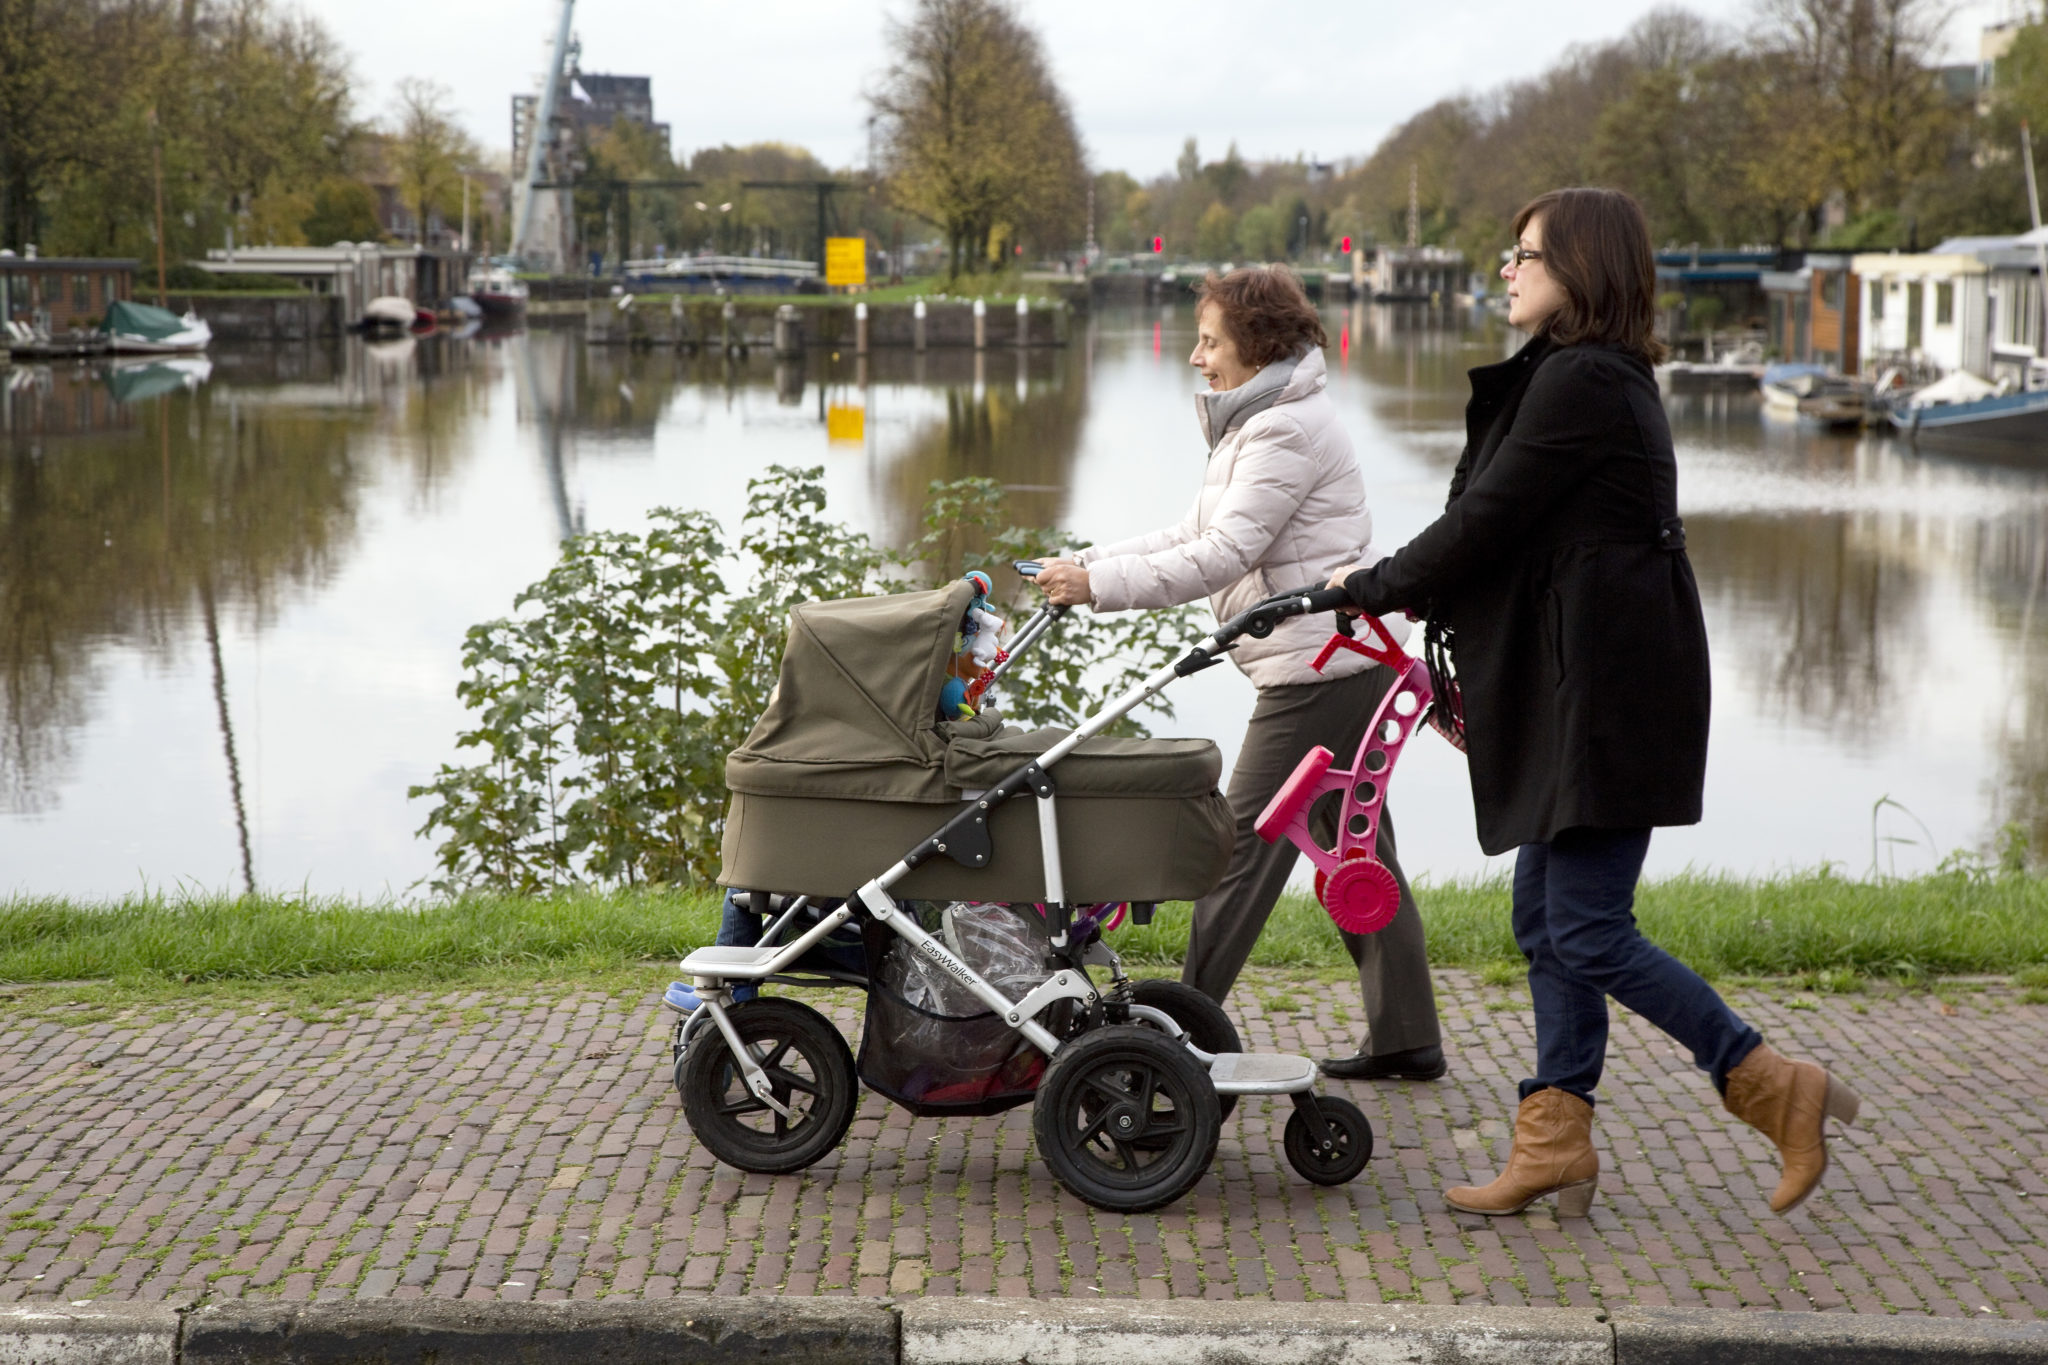 Utrecht to ban (most) cars from newest residential district